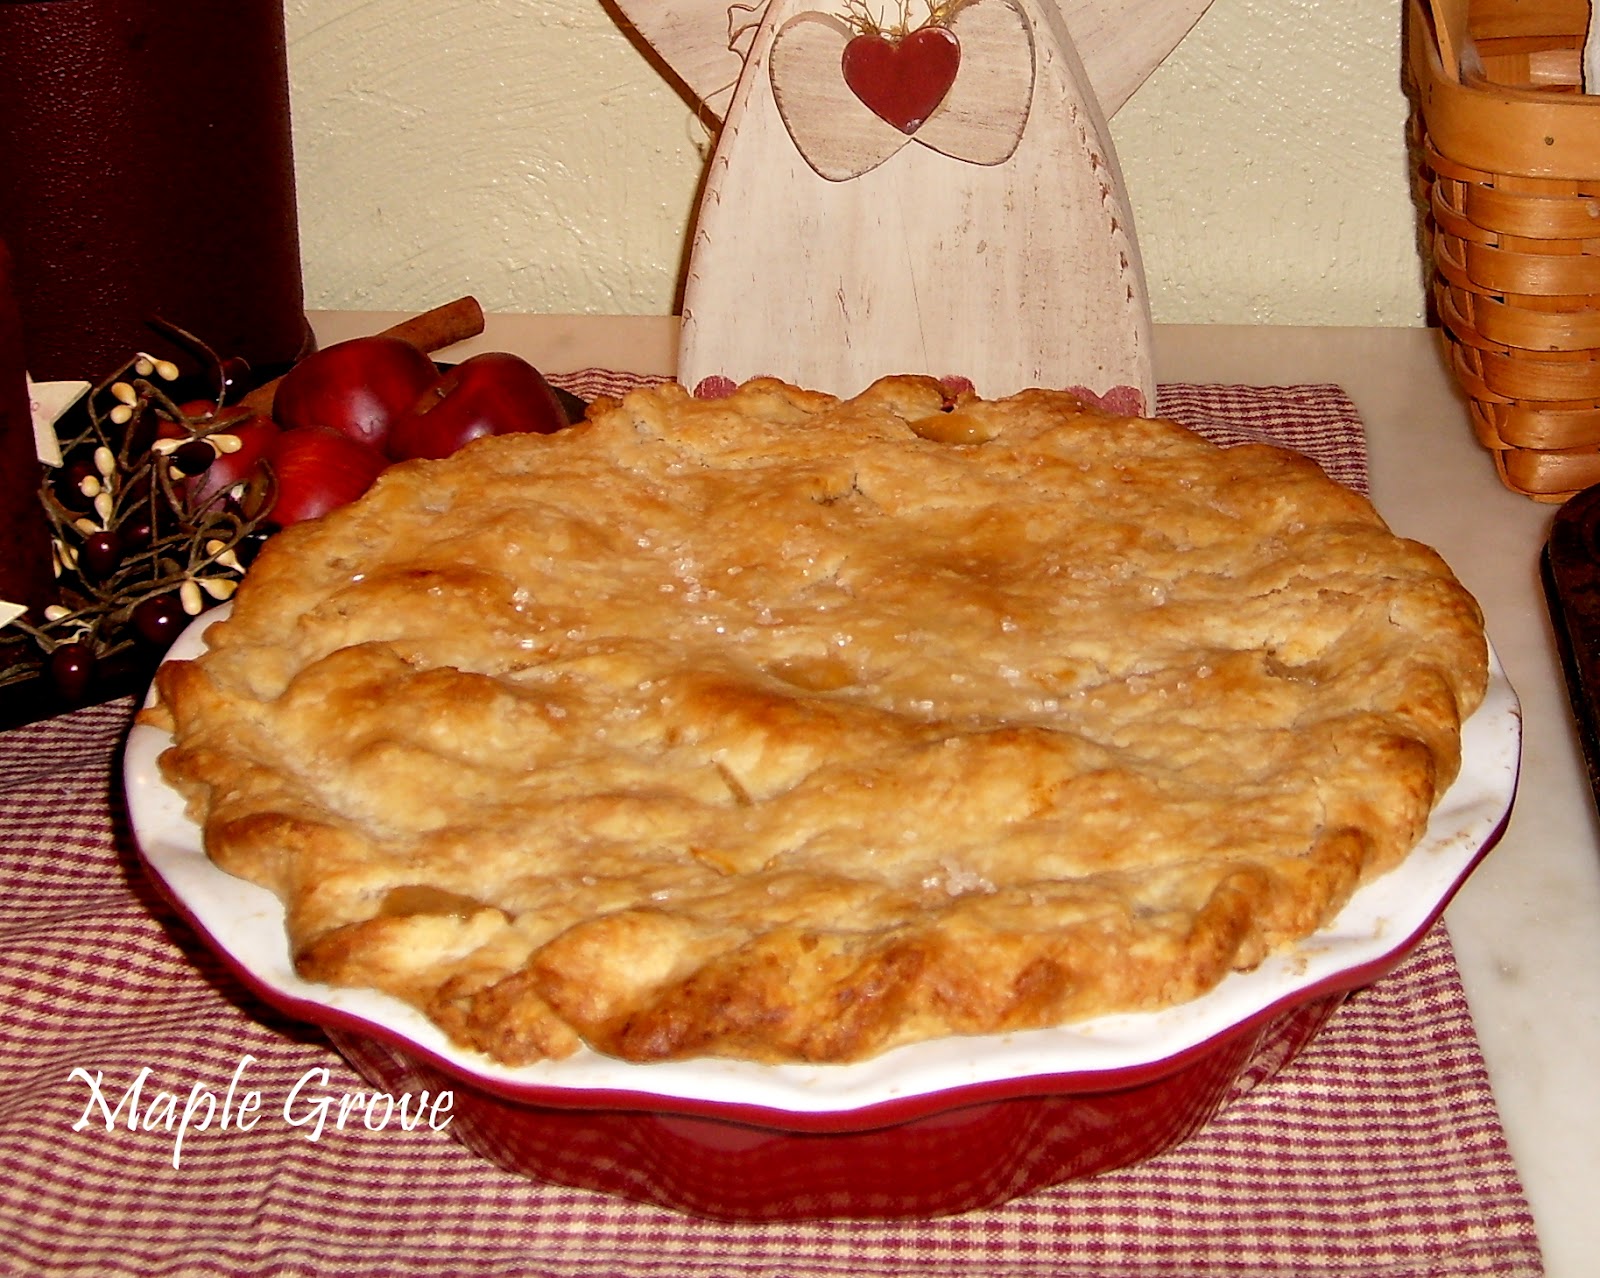 Maple Grove: Mom's Old-Fashioned Apple Pie